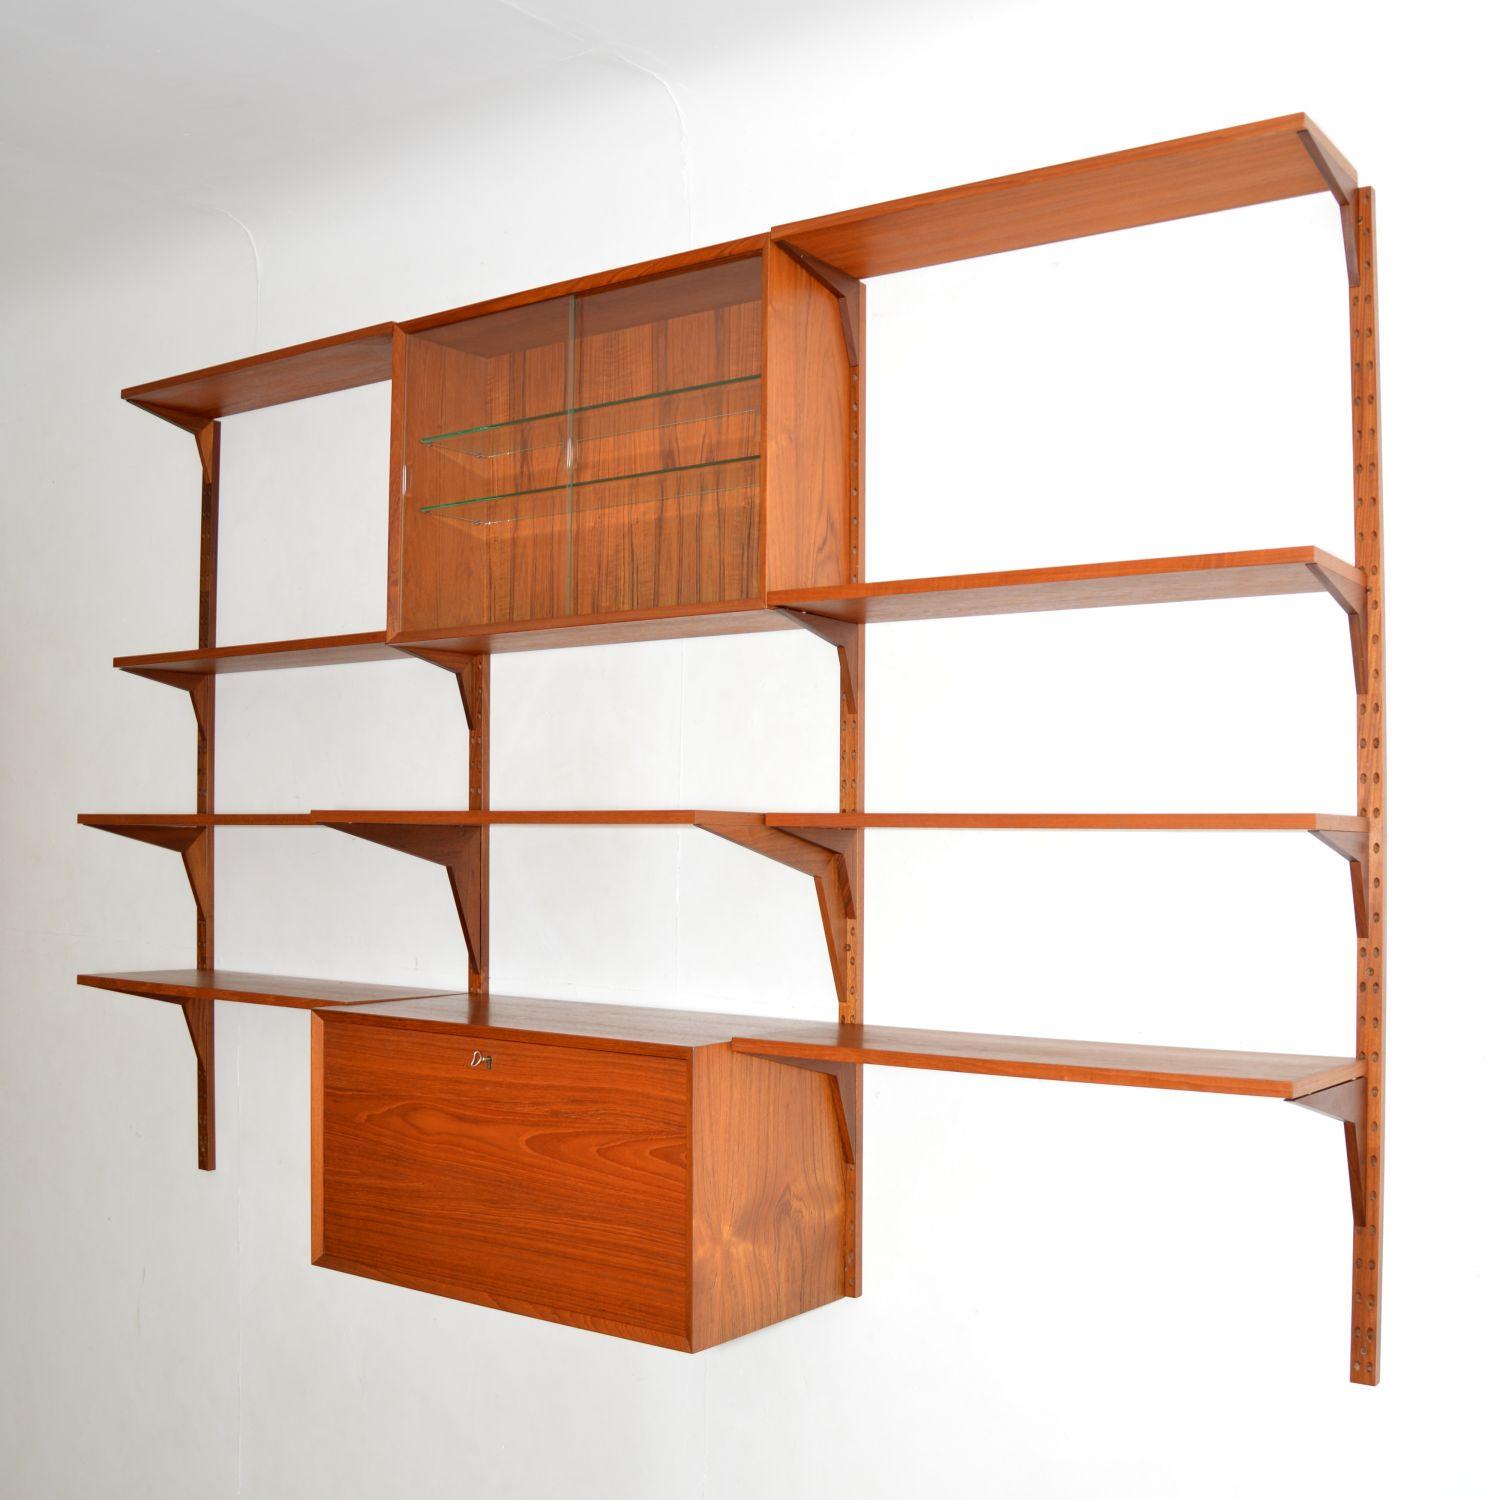 A fantastic Danish vintage teak wall mounting bookcase. This is called ‘the royal shelving unit’, it was designed by Poul Cadovius and made in Denmark by Cado. This dates from the 1960’s and was originally purchased in Heal’s.

It is a very